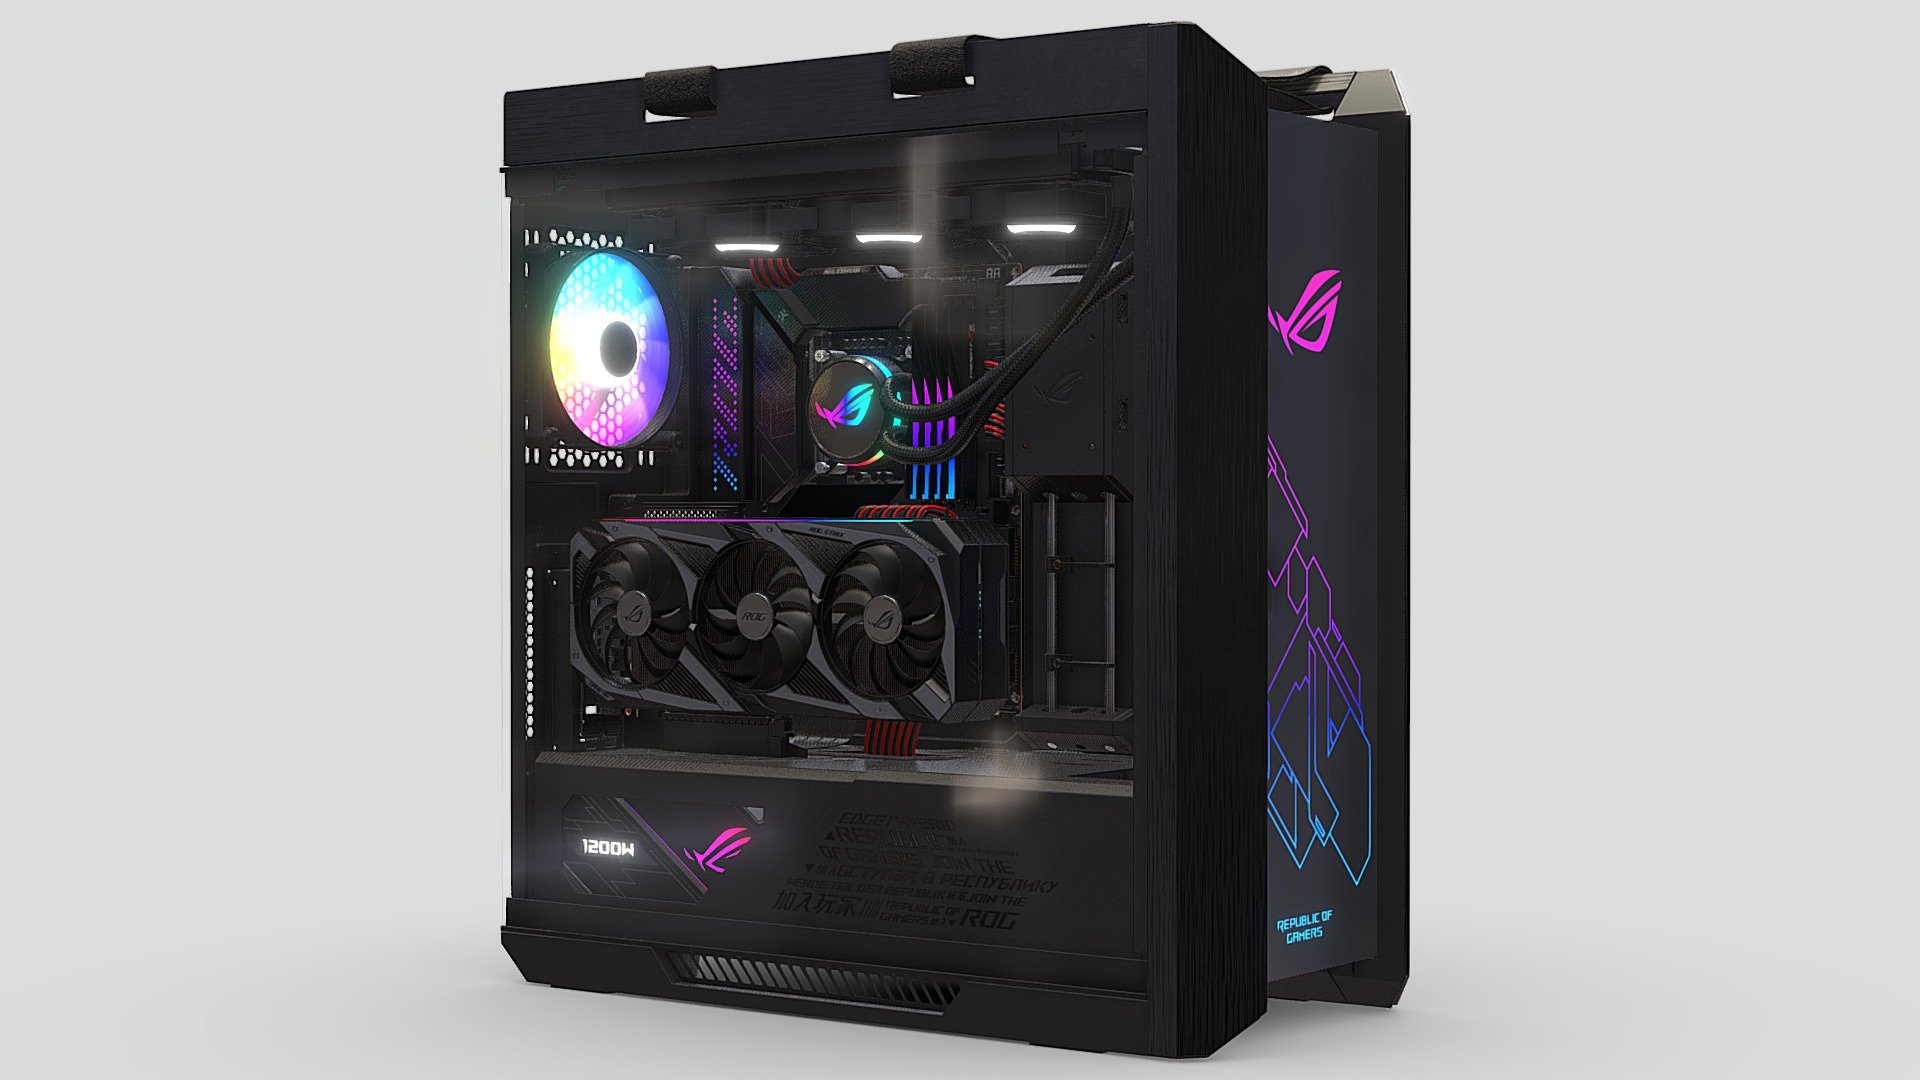 High-detailed 3d model of a gaming computer in the Asus ROG Strix Helios GX601 case

Ready to use in any software

For questions about 3d models write here: andreyfedyushov@gmail.com - Asus ROG Strix Helios Vertical - 3D model by digitalrazor3d 3d model